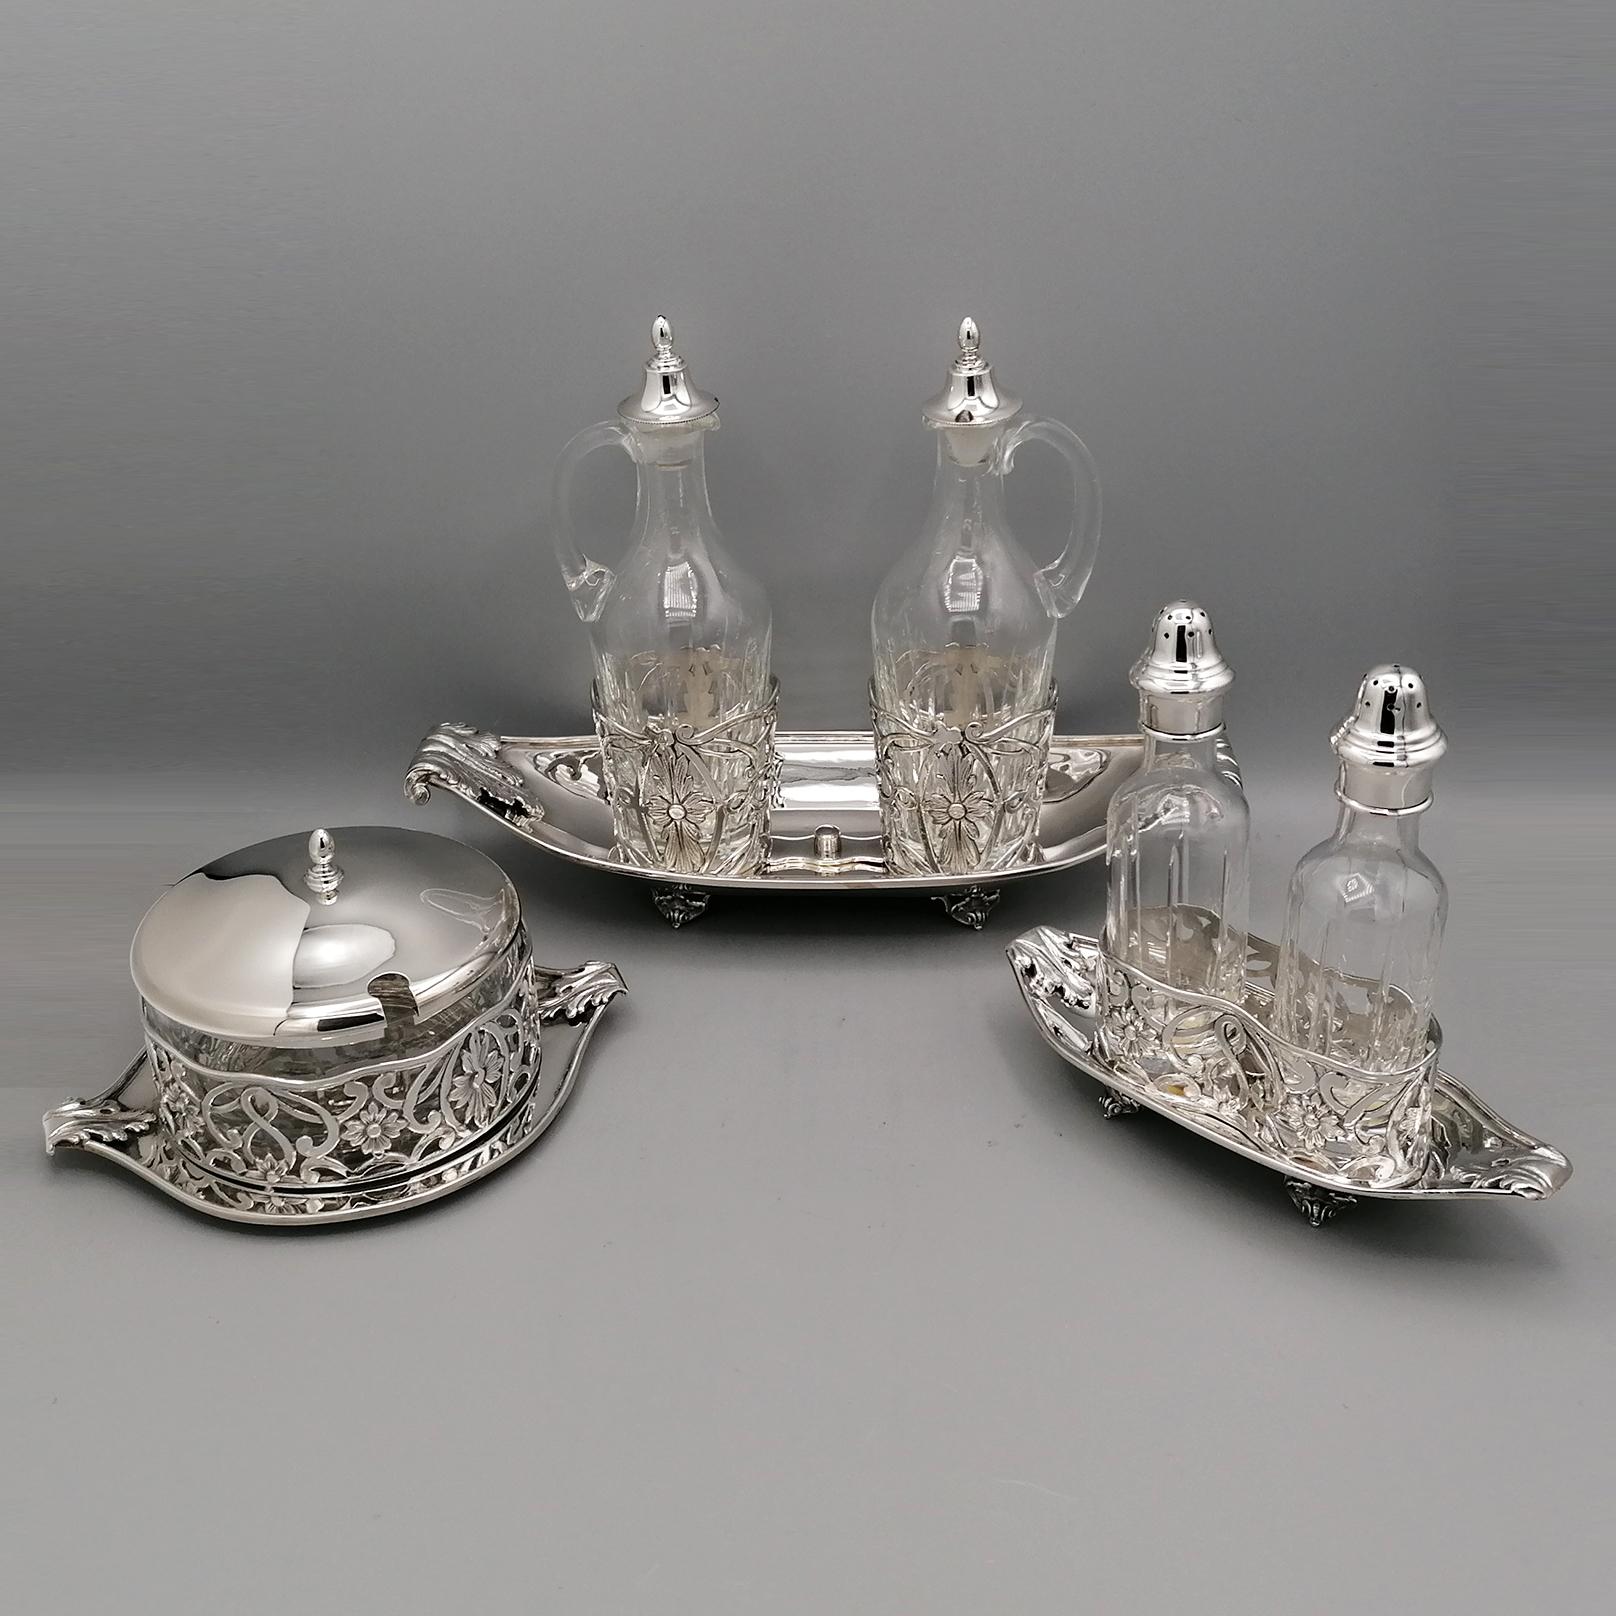 Set of Art Nuoveau - Liberty replica of oil cruet, parmesan bowl and salt/pepper in 925 Sterling silver made in Milan. Italy, late 20th century.
The whole set was made by hand, modeling the small trays of the oil cruet, the parmesan bowl and the